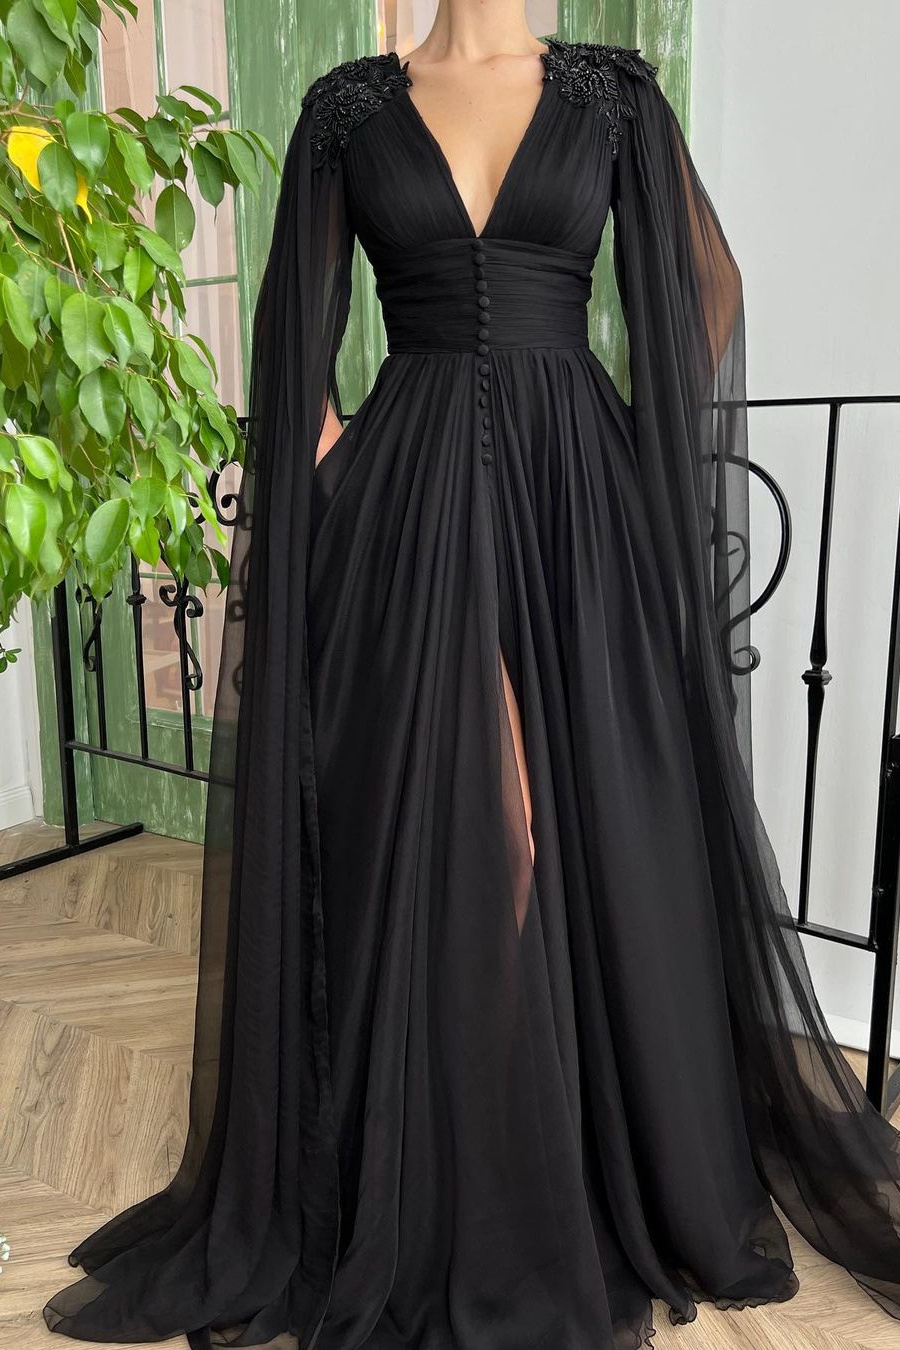 Bellasprom Black Ruffle Sleeves Prom Dress Long Slit With Buttons Bellasprom